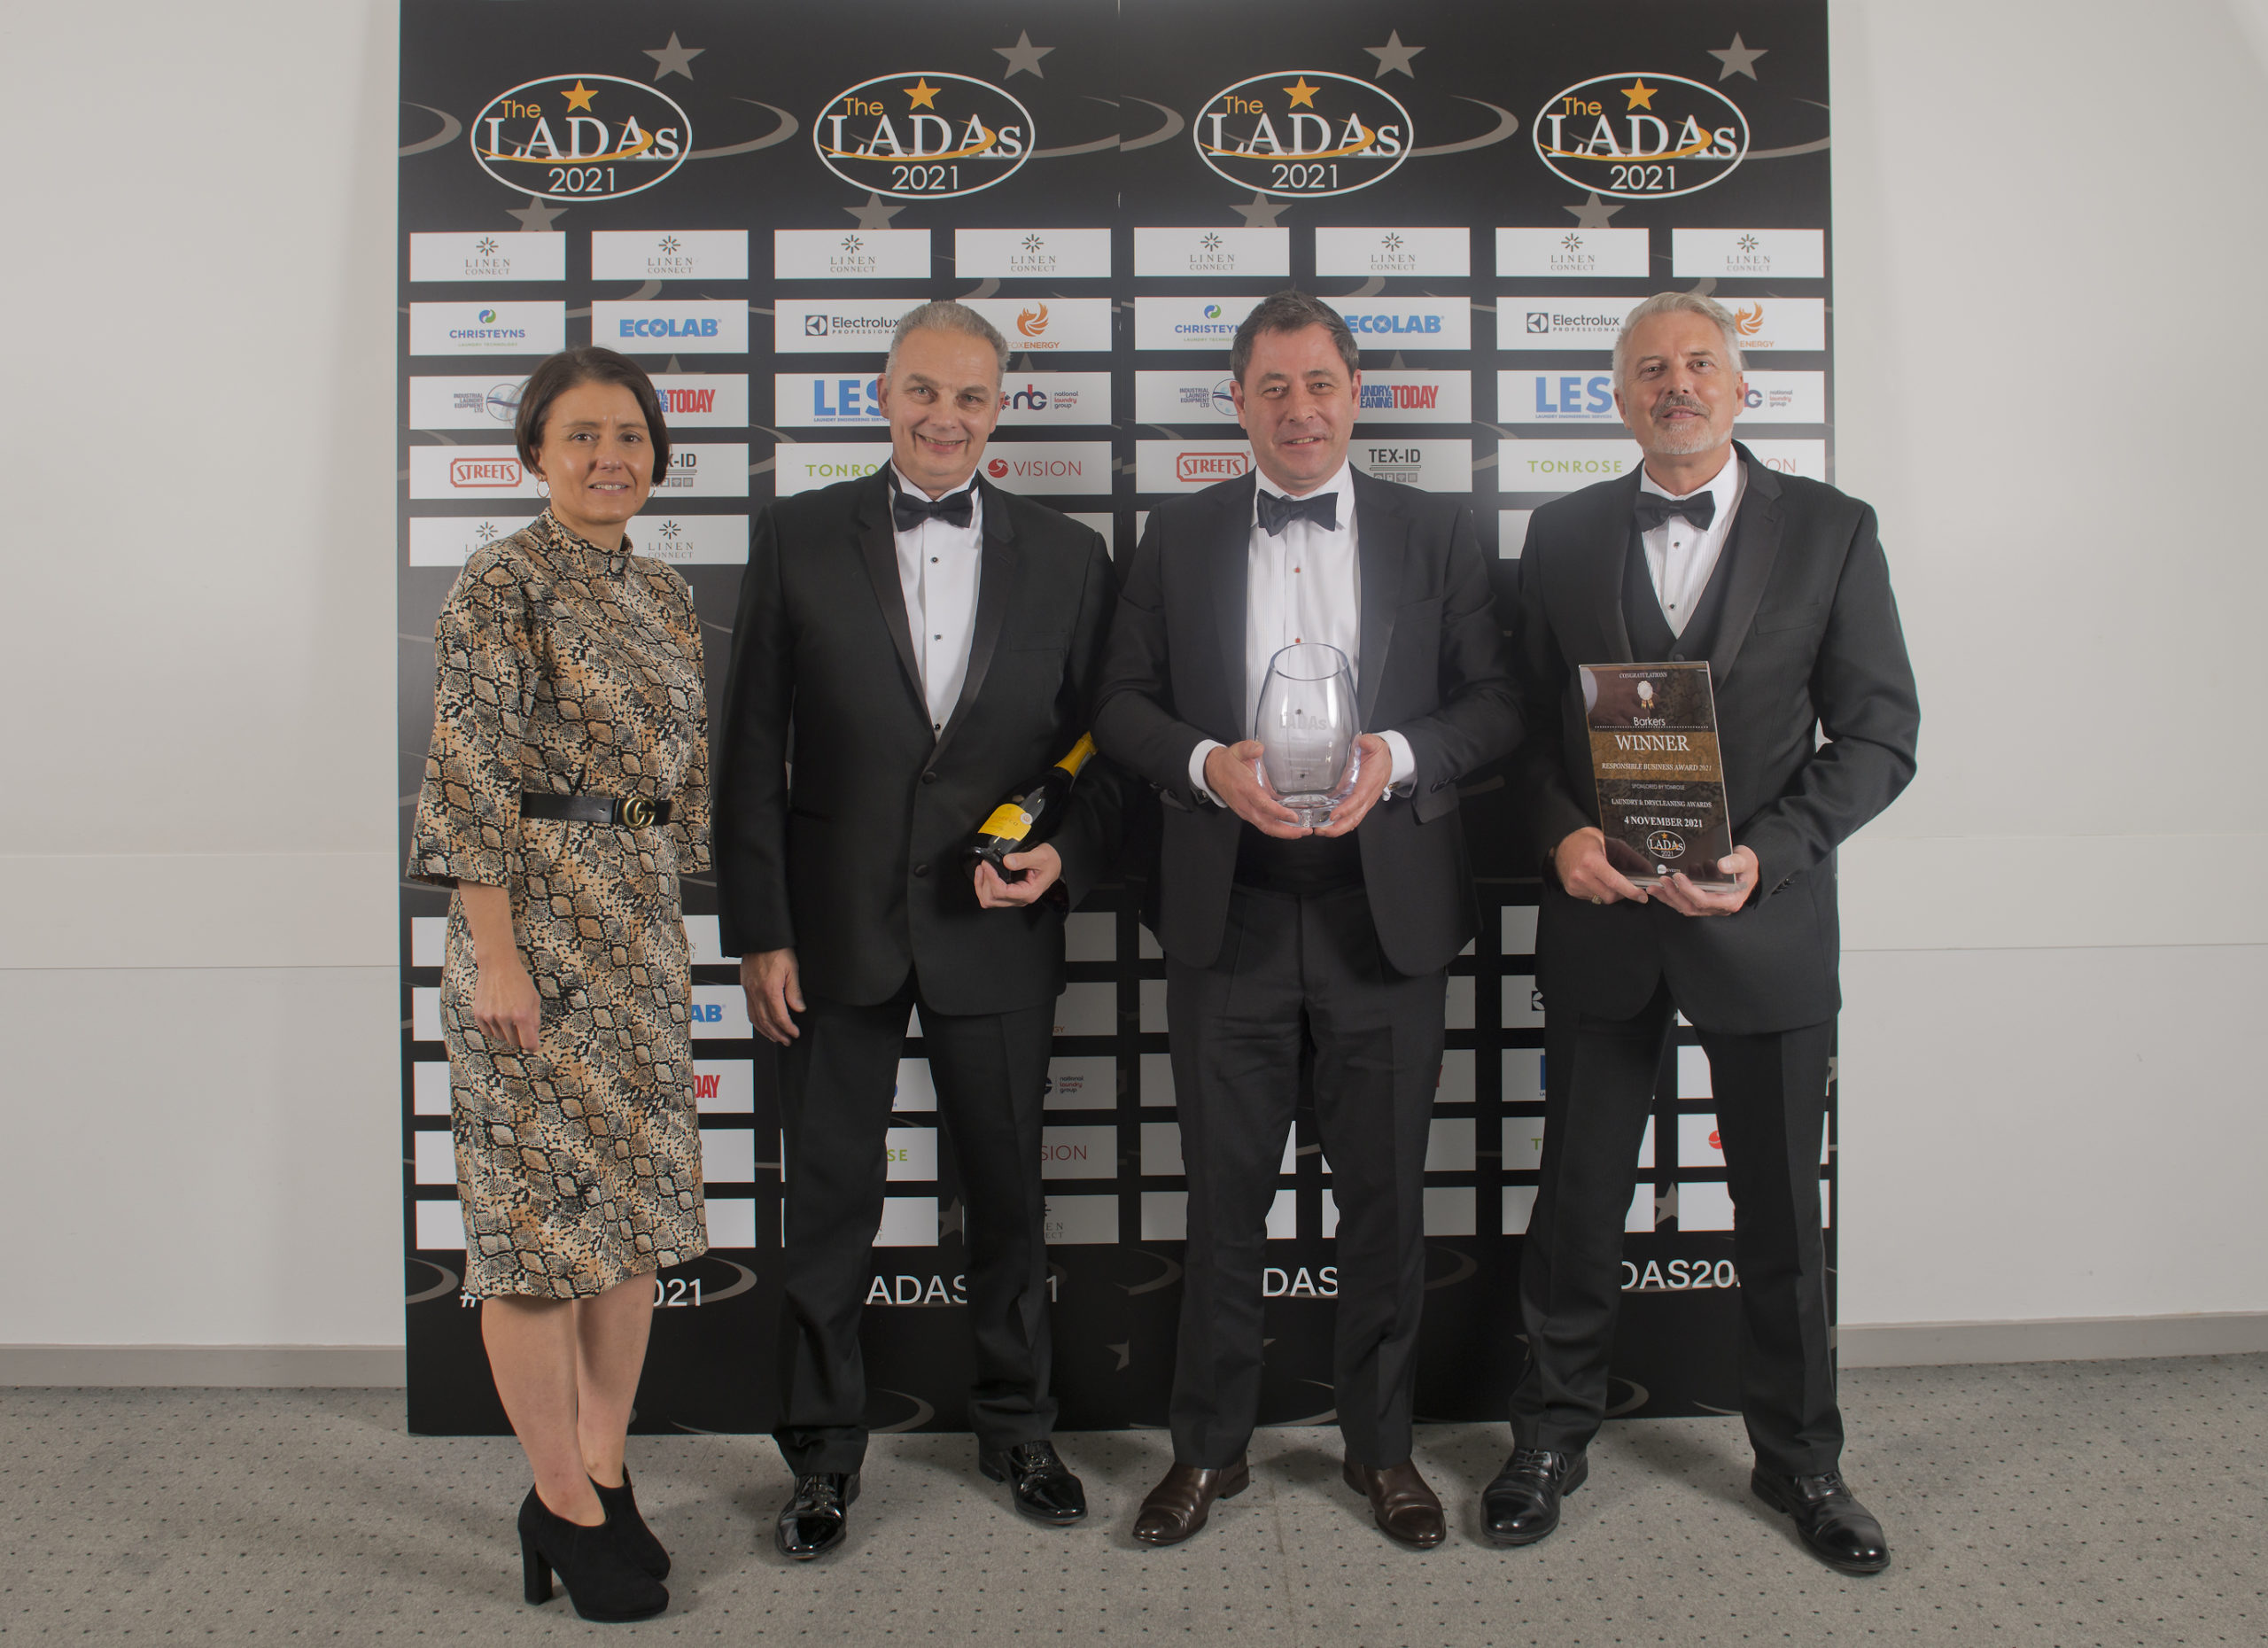 Barker win ‘Responsible Business’ award category at national industry awards